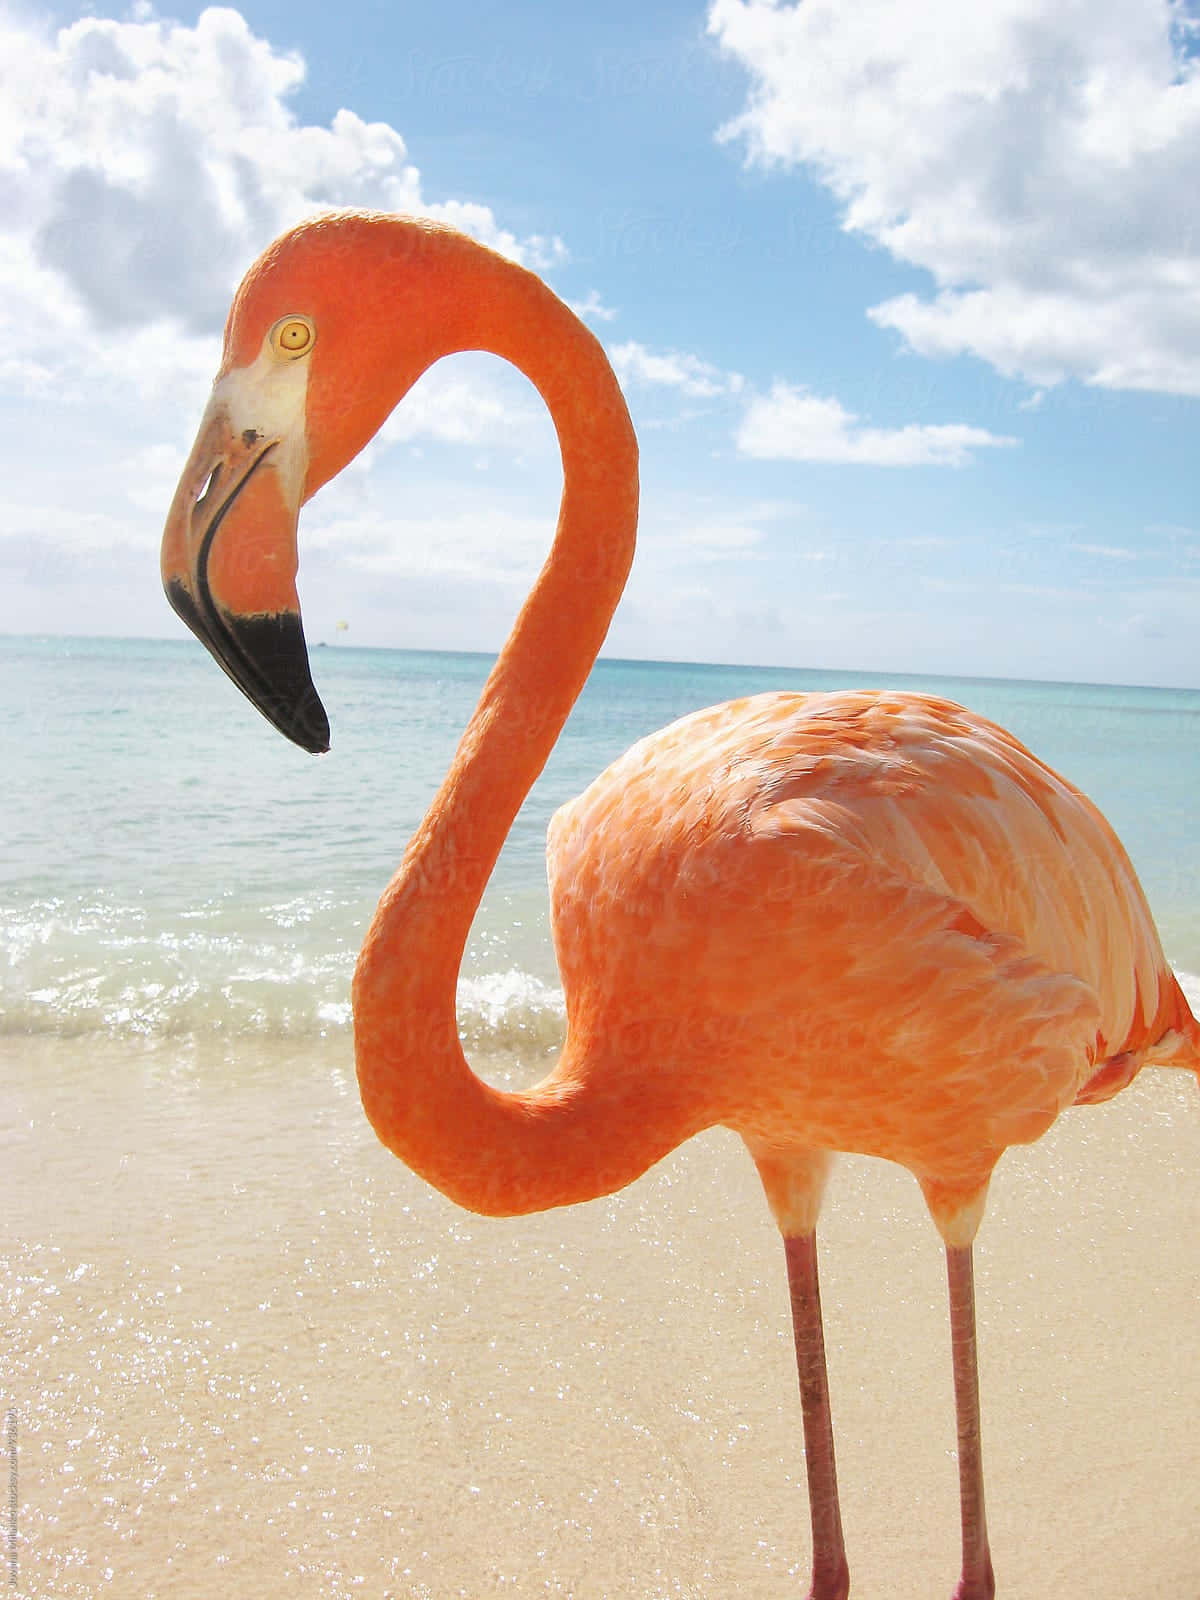 "A majestic pink flamingo stands tall on one leg at the beach."